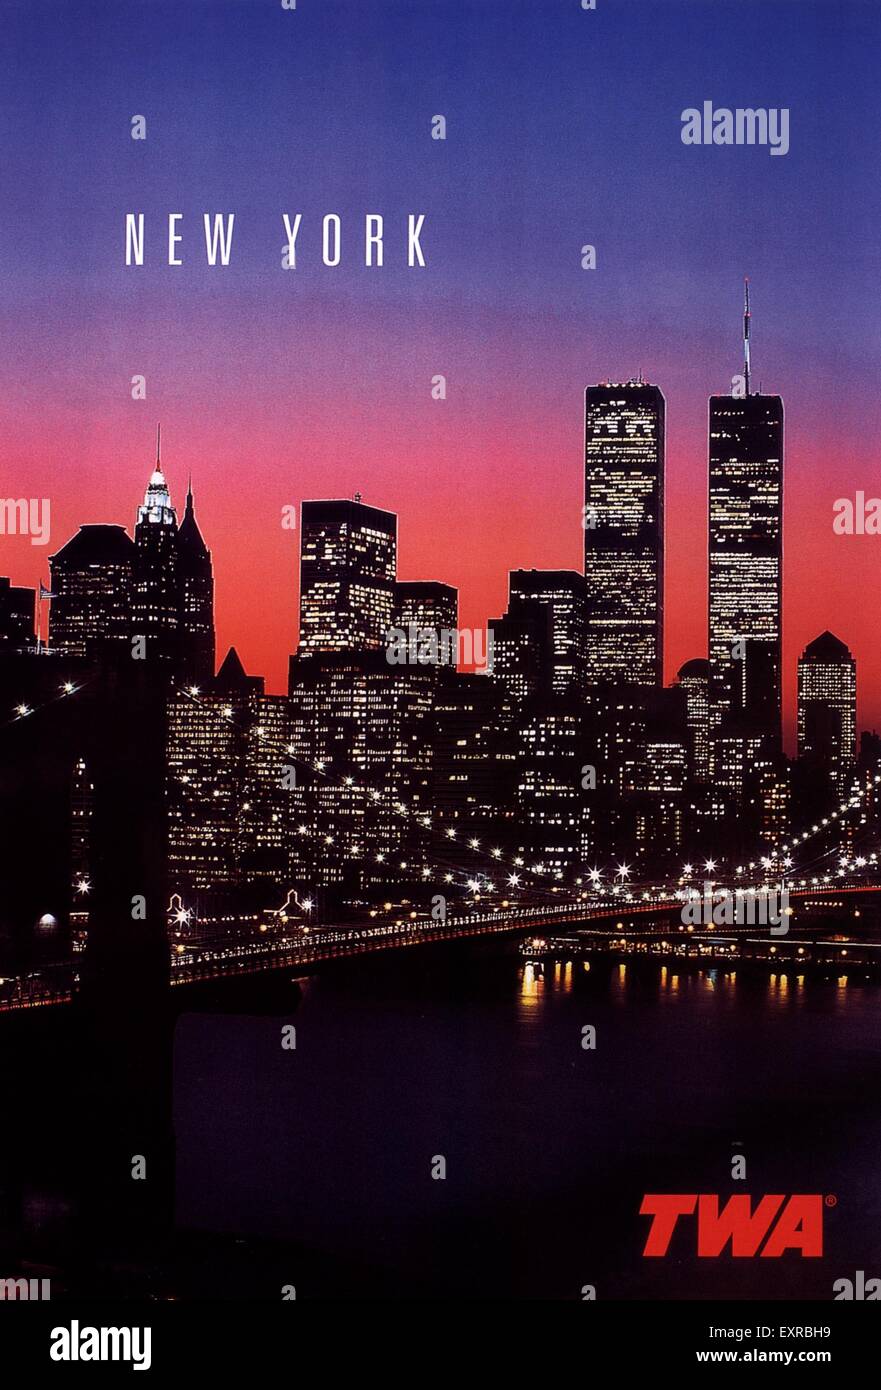 2000s USA Airlines TWA Poster Stock Photo